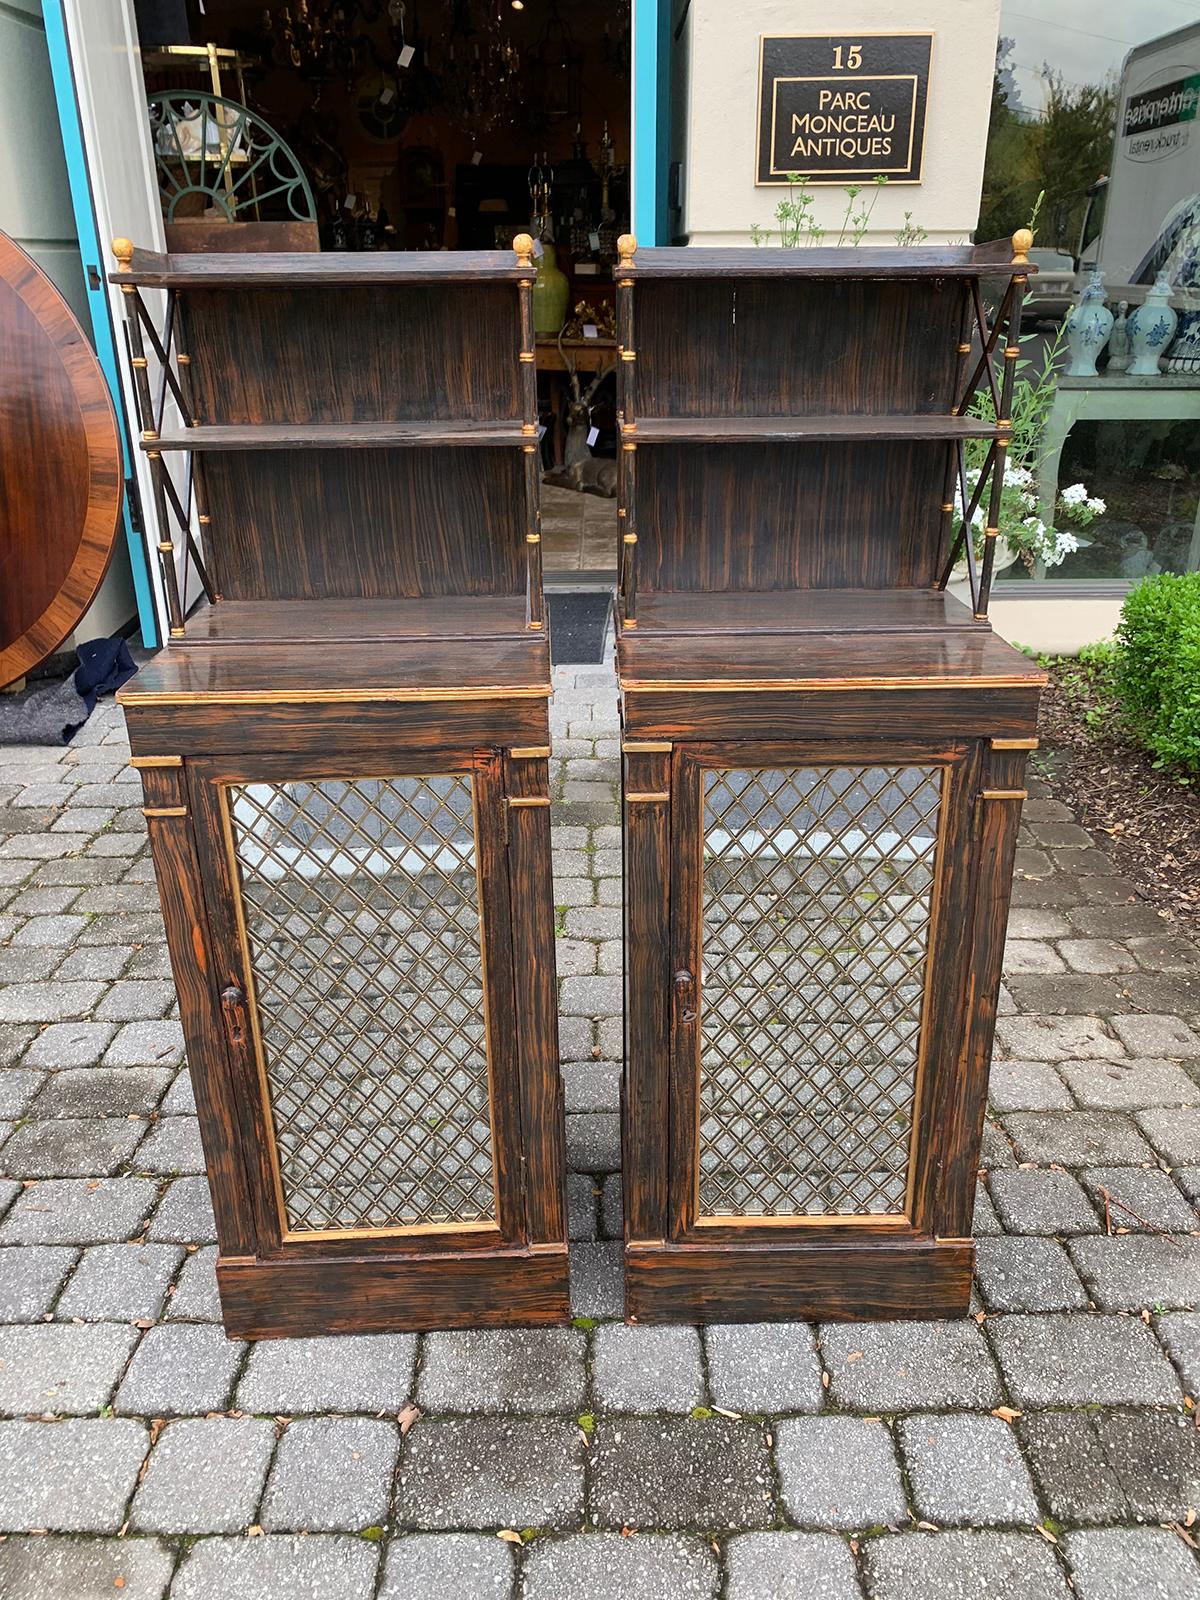 Pair of 19th century Regency faux Bois Chiffoniers, mirrored door, circa 1825
Three shelves inside
Two exposed shelves on top
Keys for door.